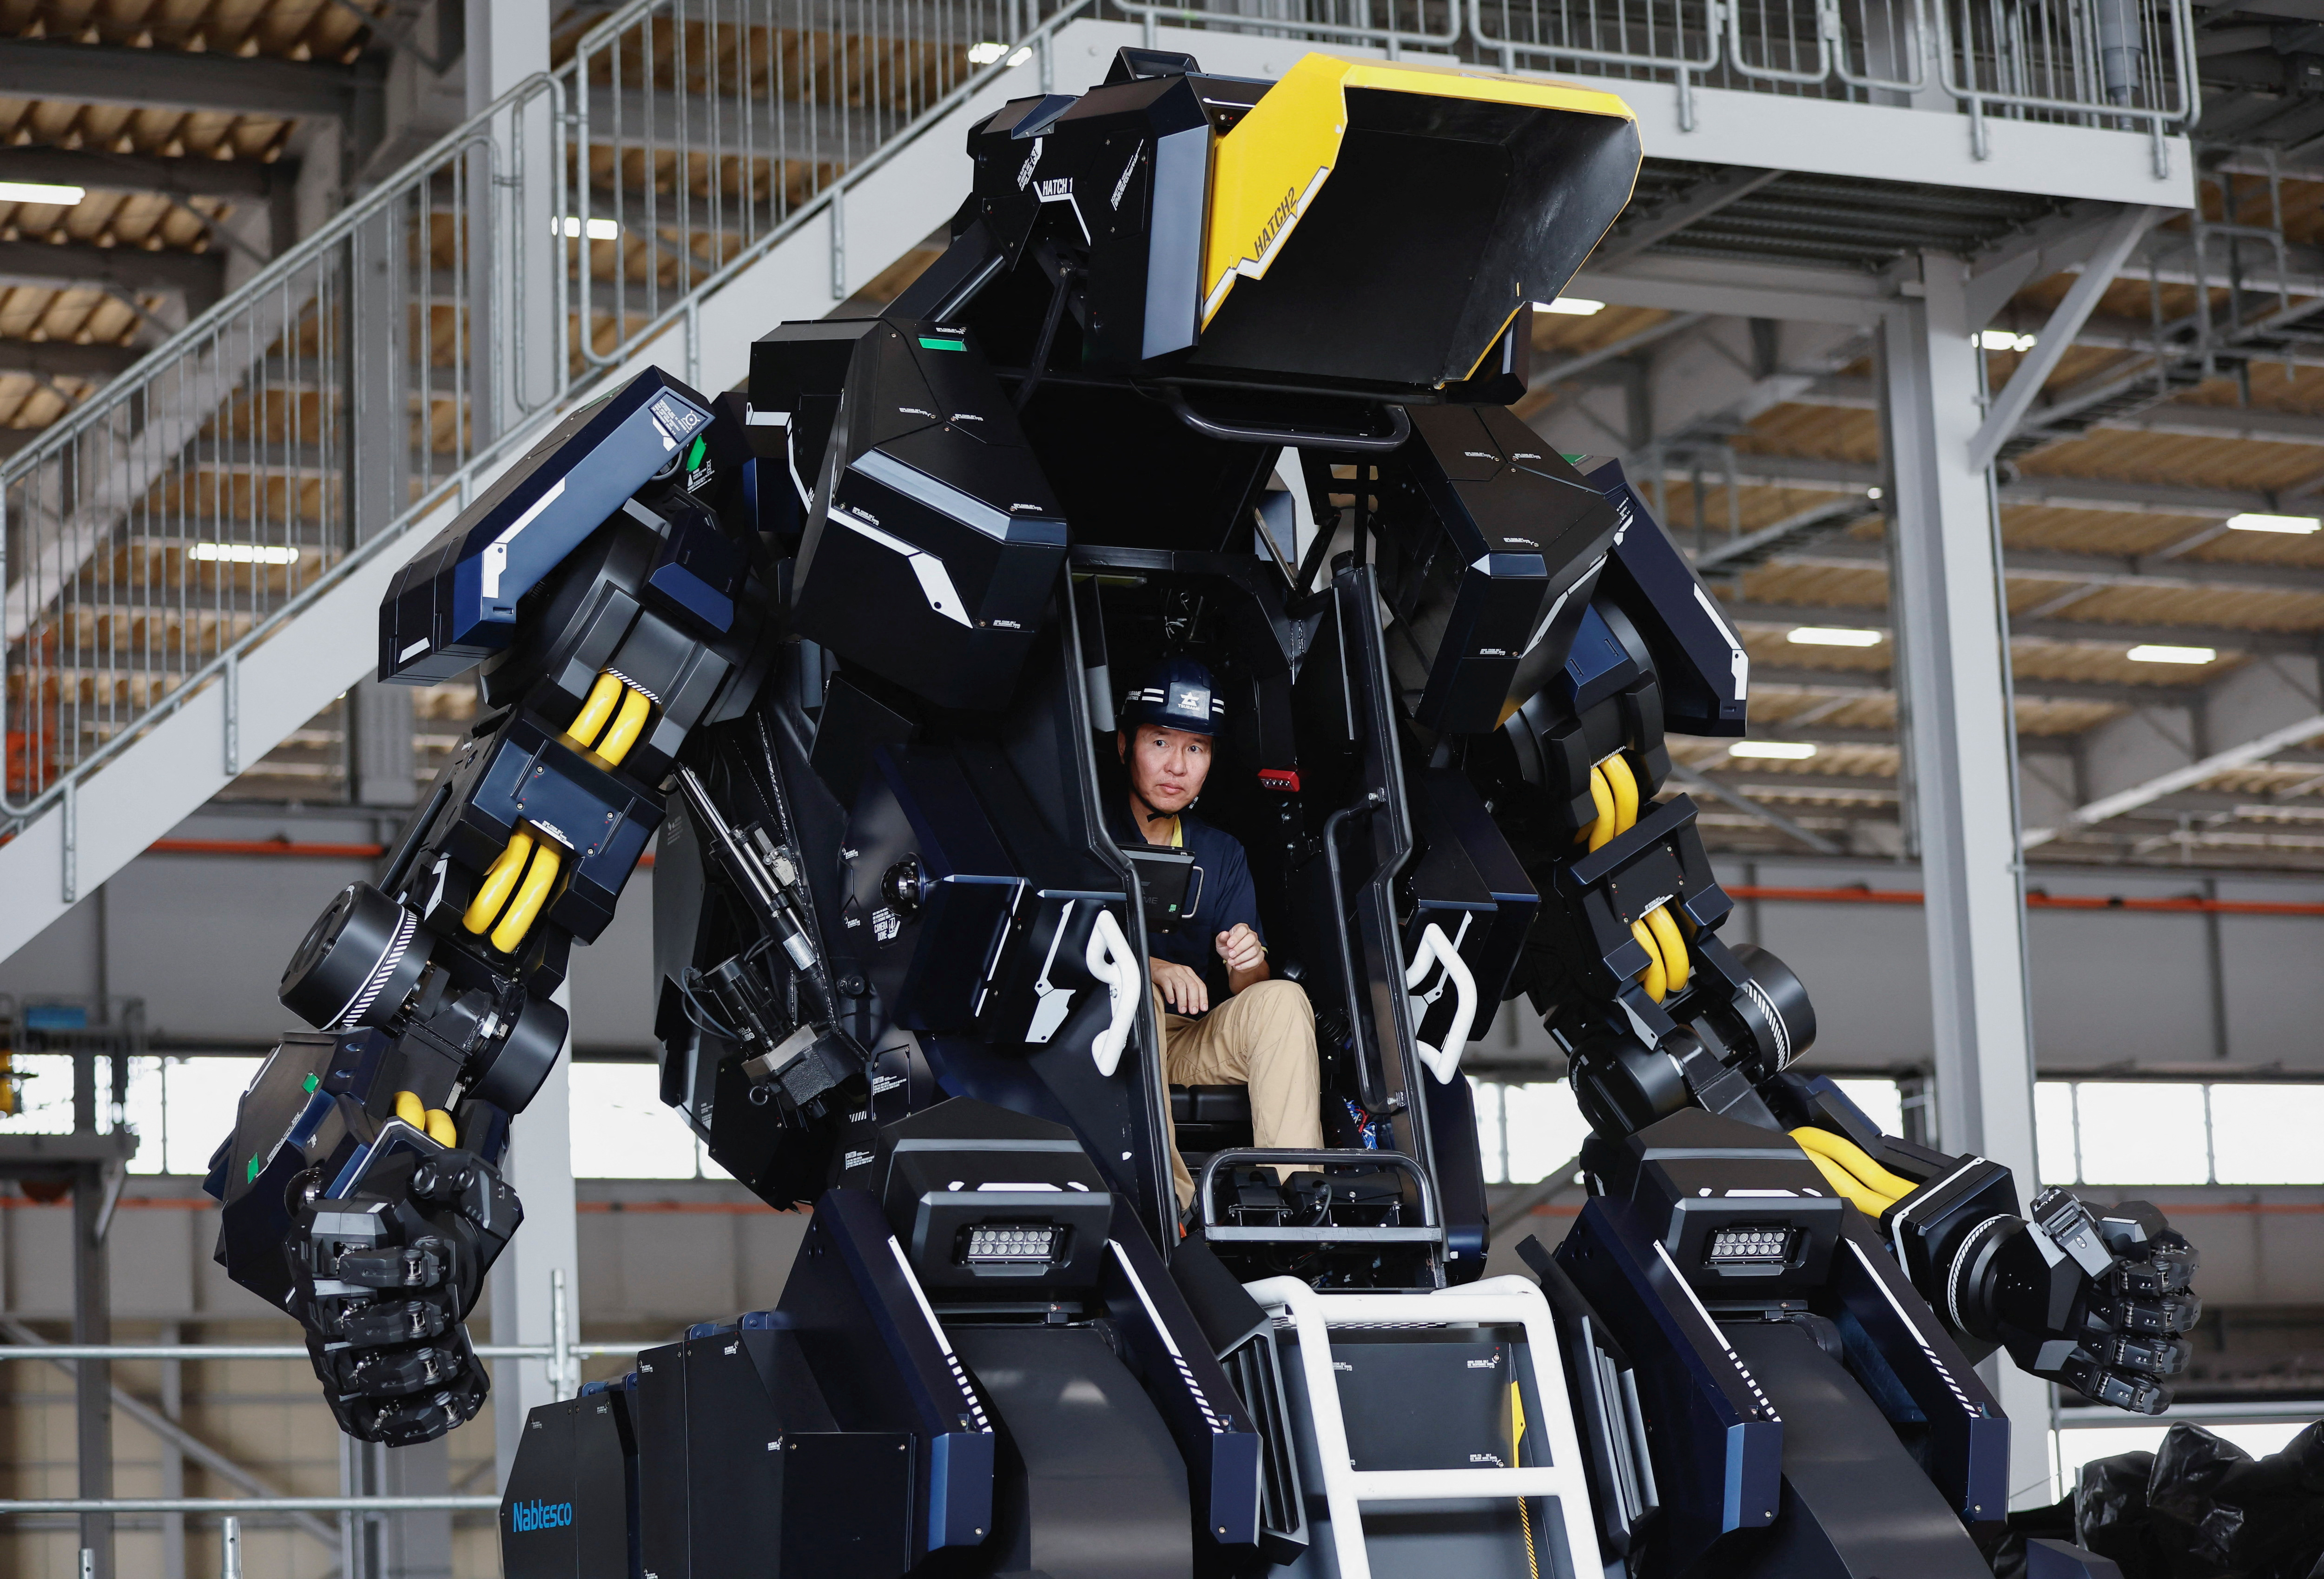 Japan startup develops 'Gundam'-like robot with $3 mln price tag | Reuters